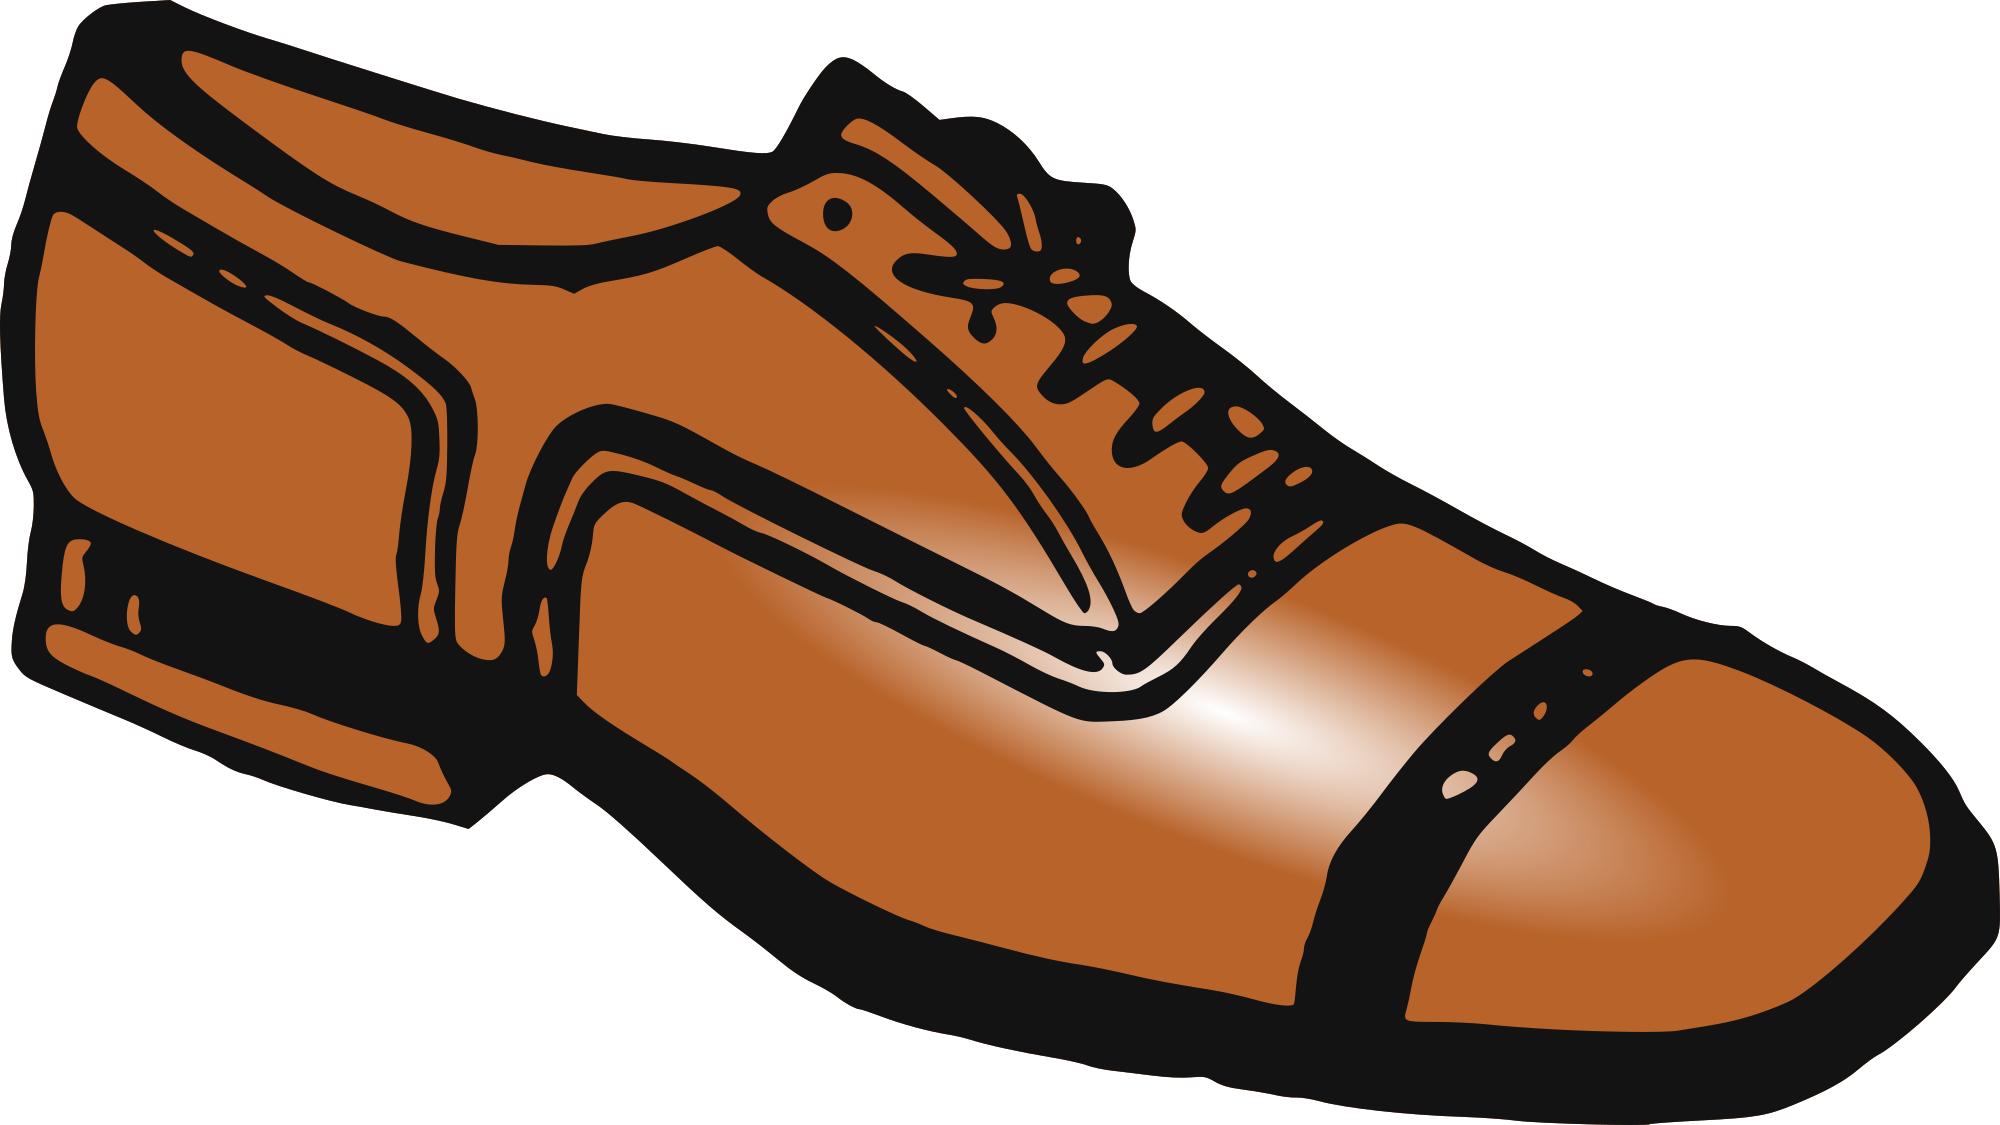 Tying shoes clipart on transparent 